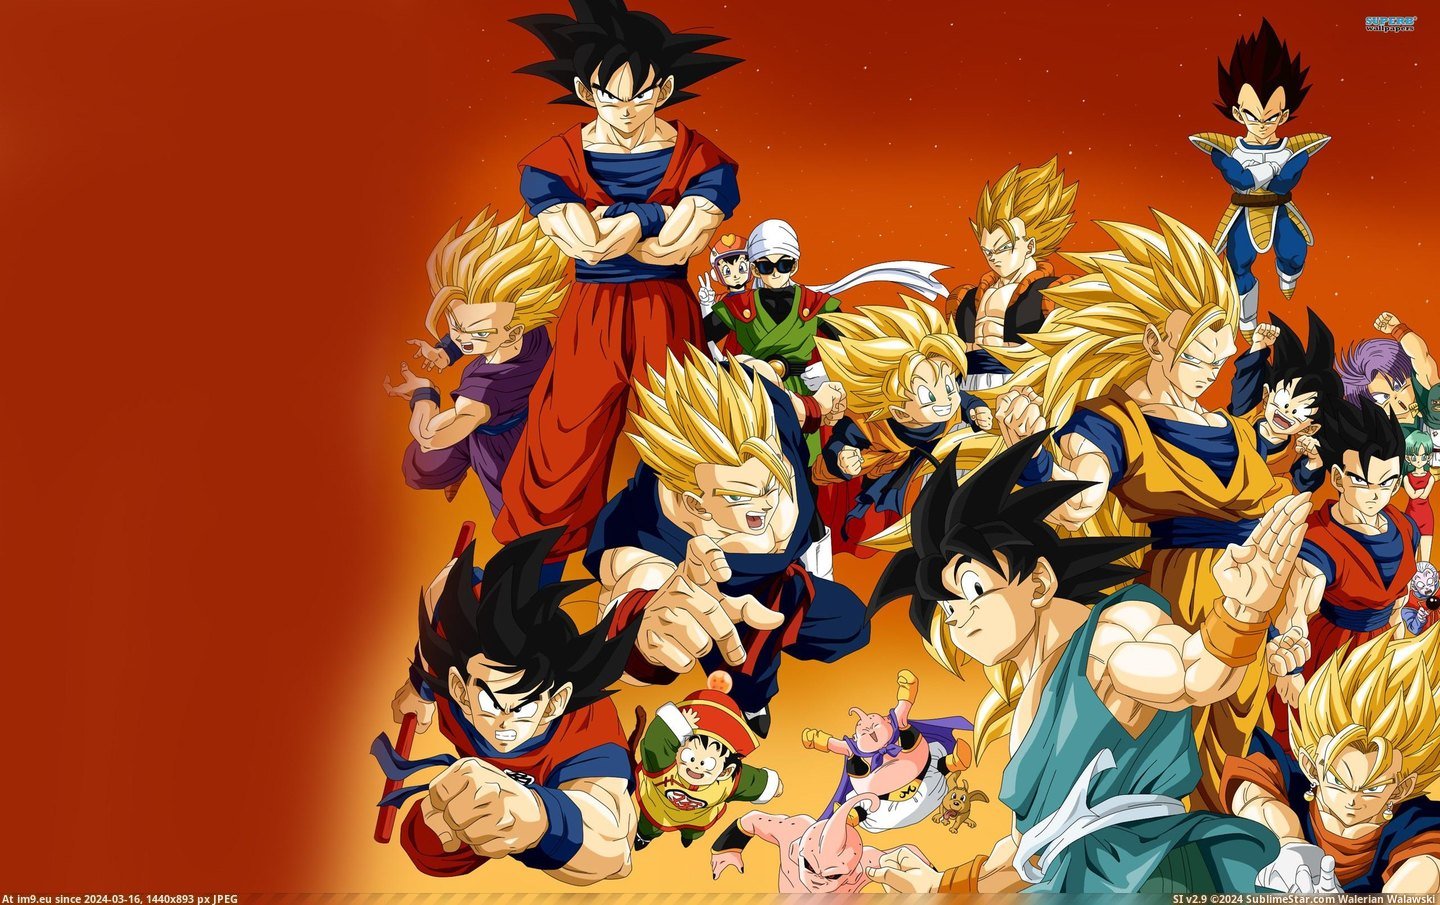 #Wallpapers  #Dragonball Dragonball Wallpapers 250 (HD) Pic. (Bild von album HD Wallpapers - anime, games and abstract art/3D backgrounds))